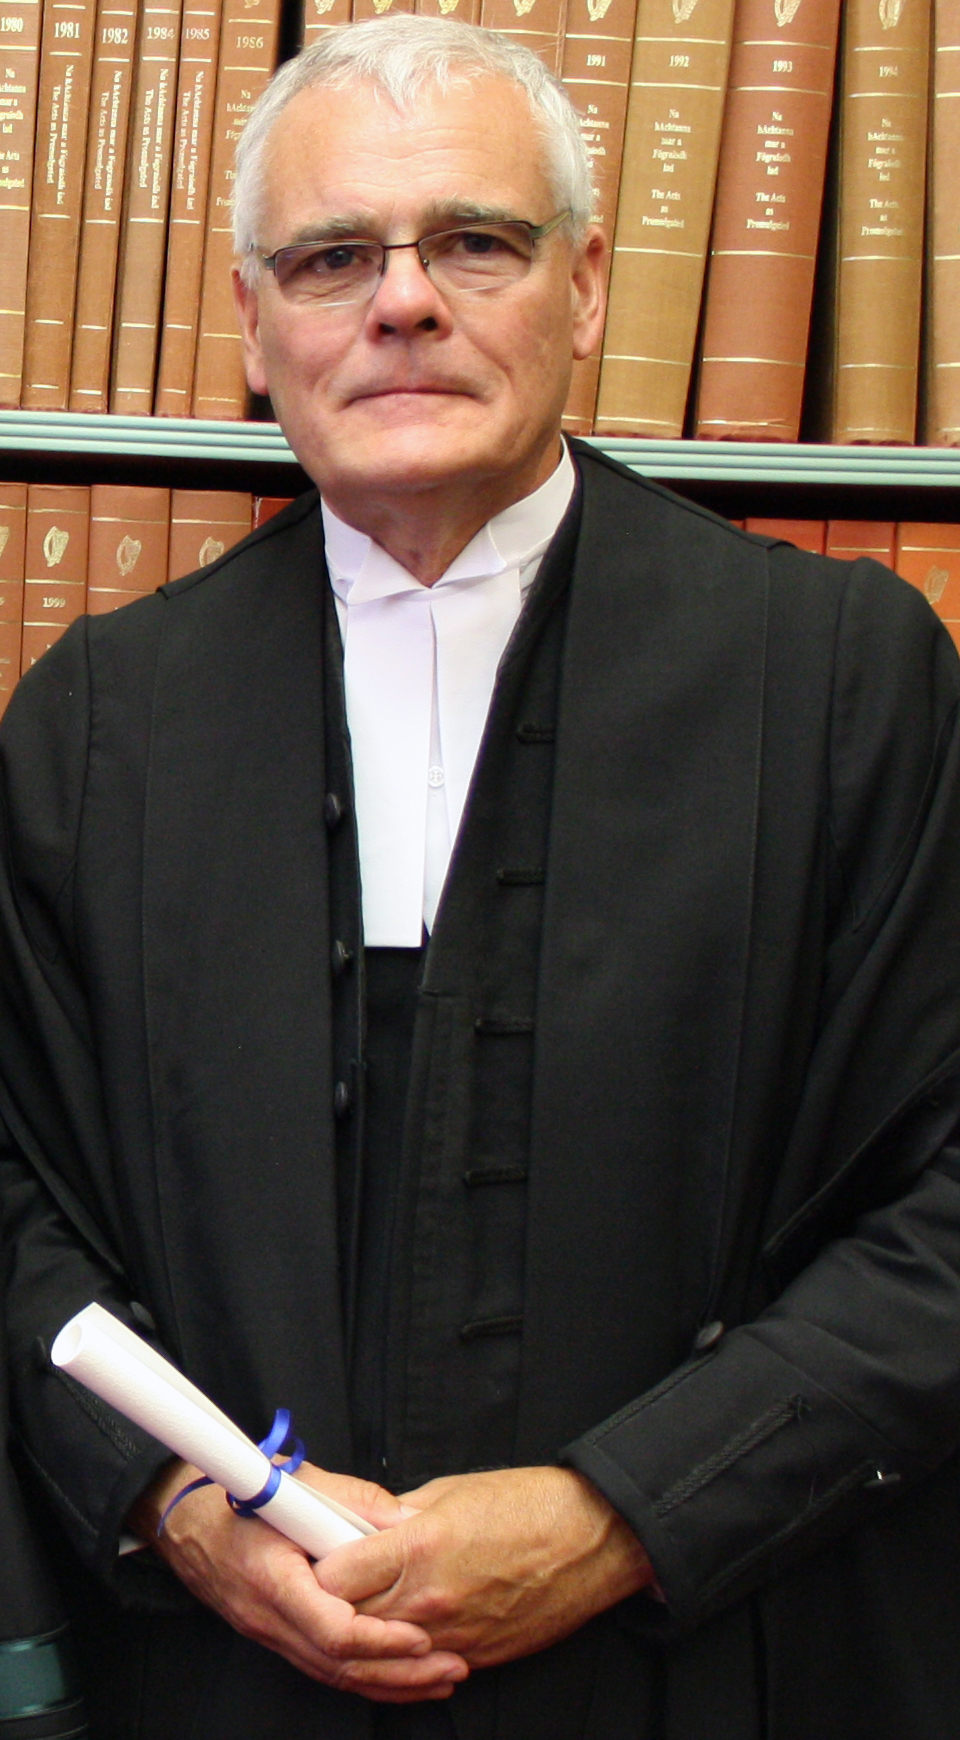 Mr Justice Meenan to investigate alternatives to court for CervicalCheck women